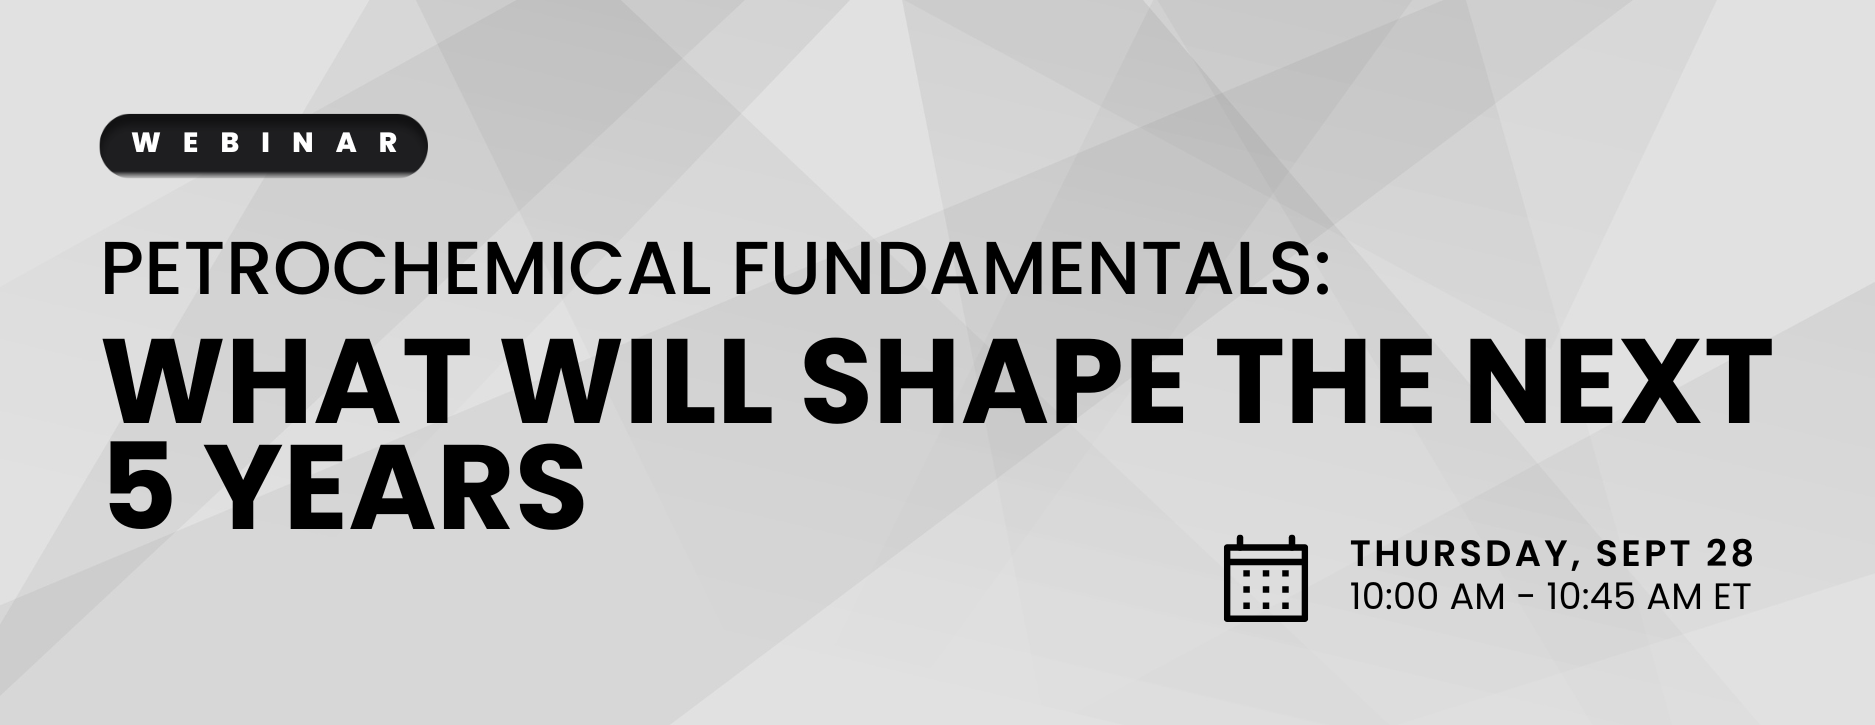 ESAI Energy Webinar: Petrochemical Fundamentals - What Will Shape the Next 5 Years